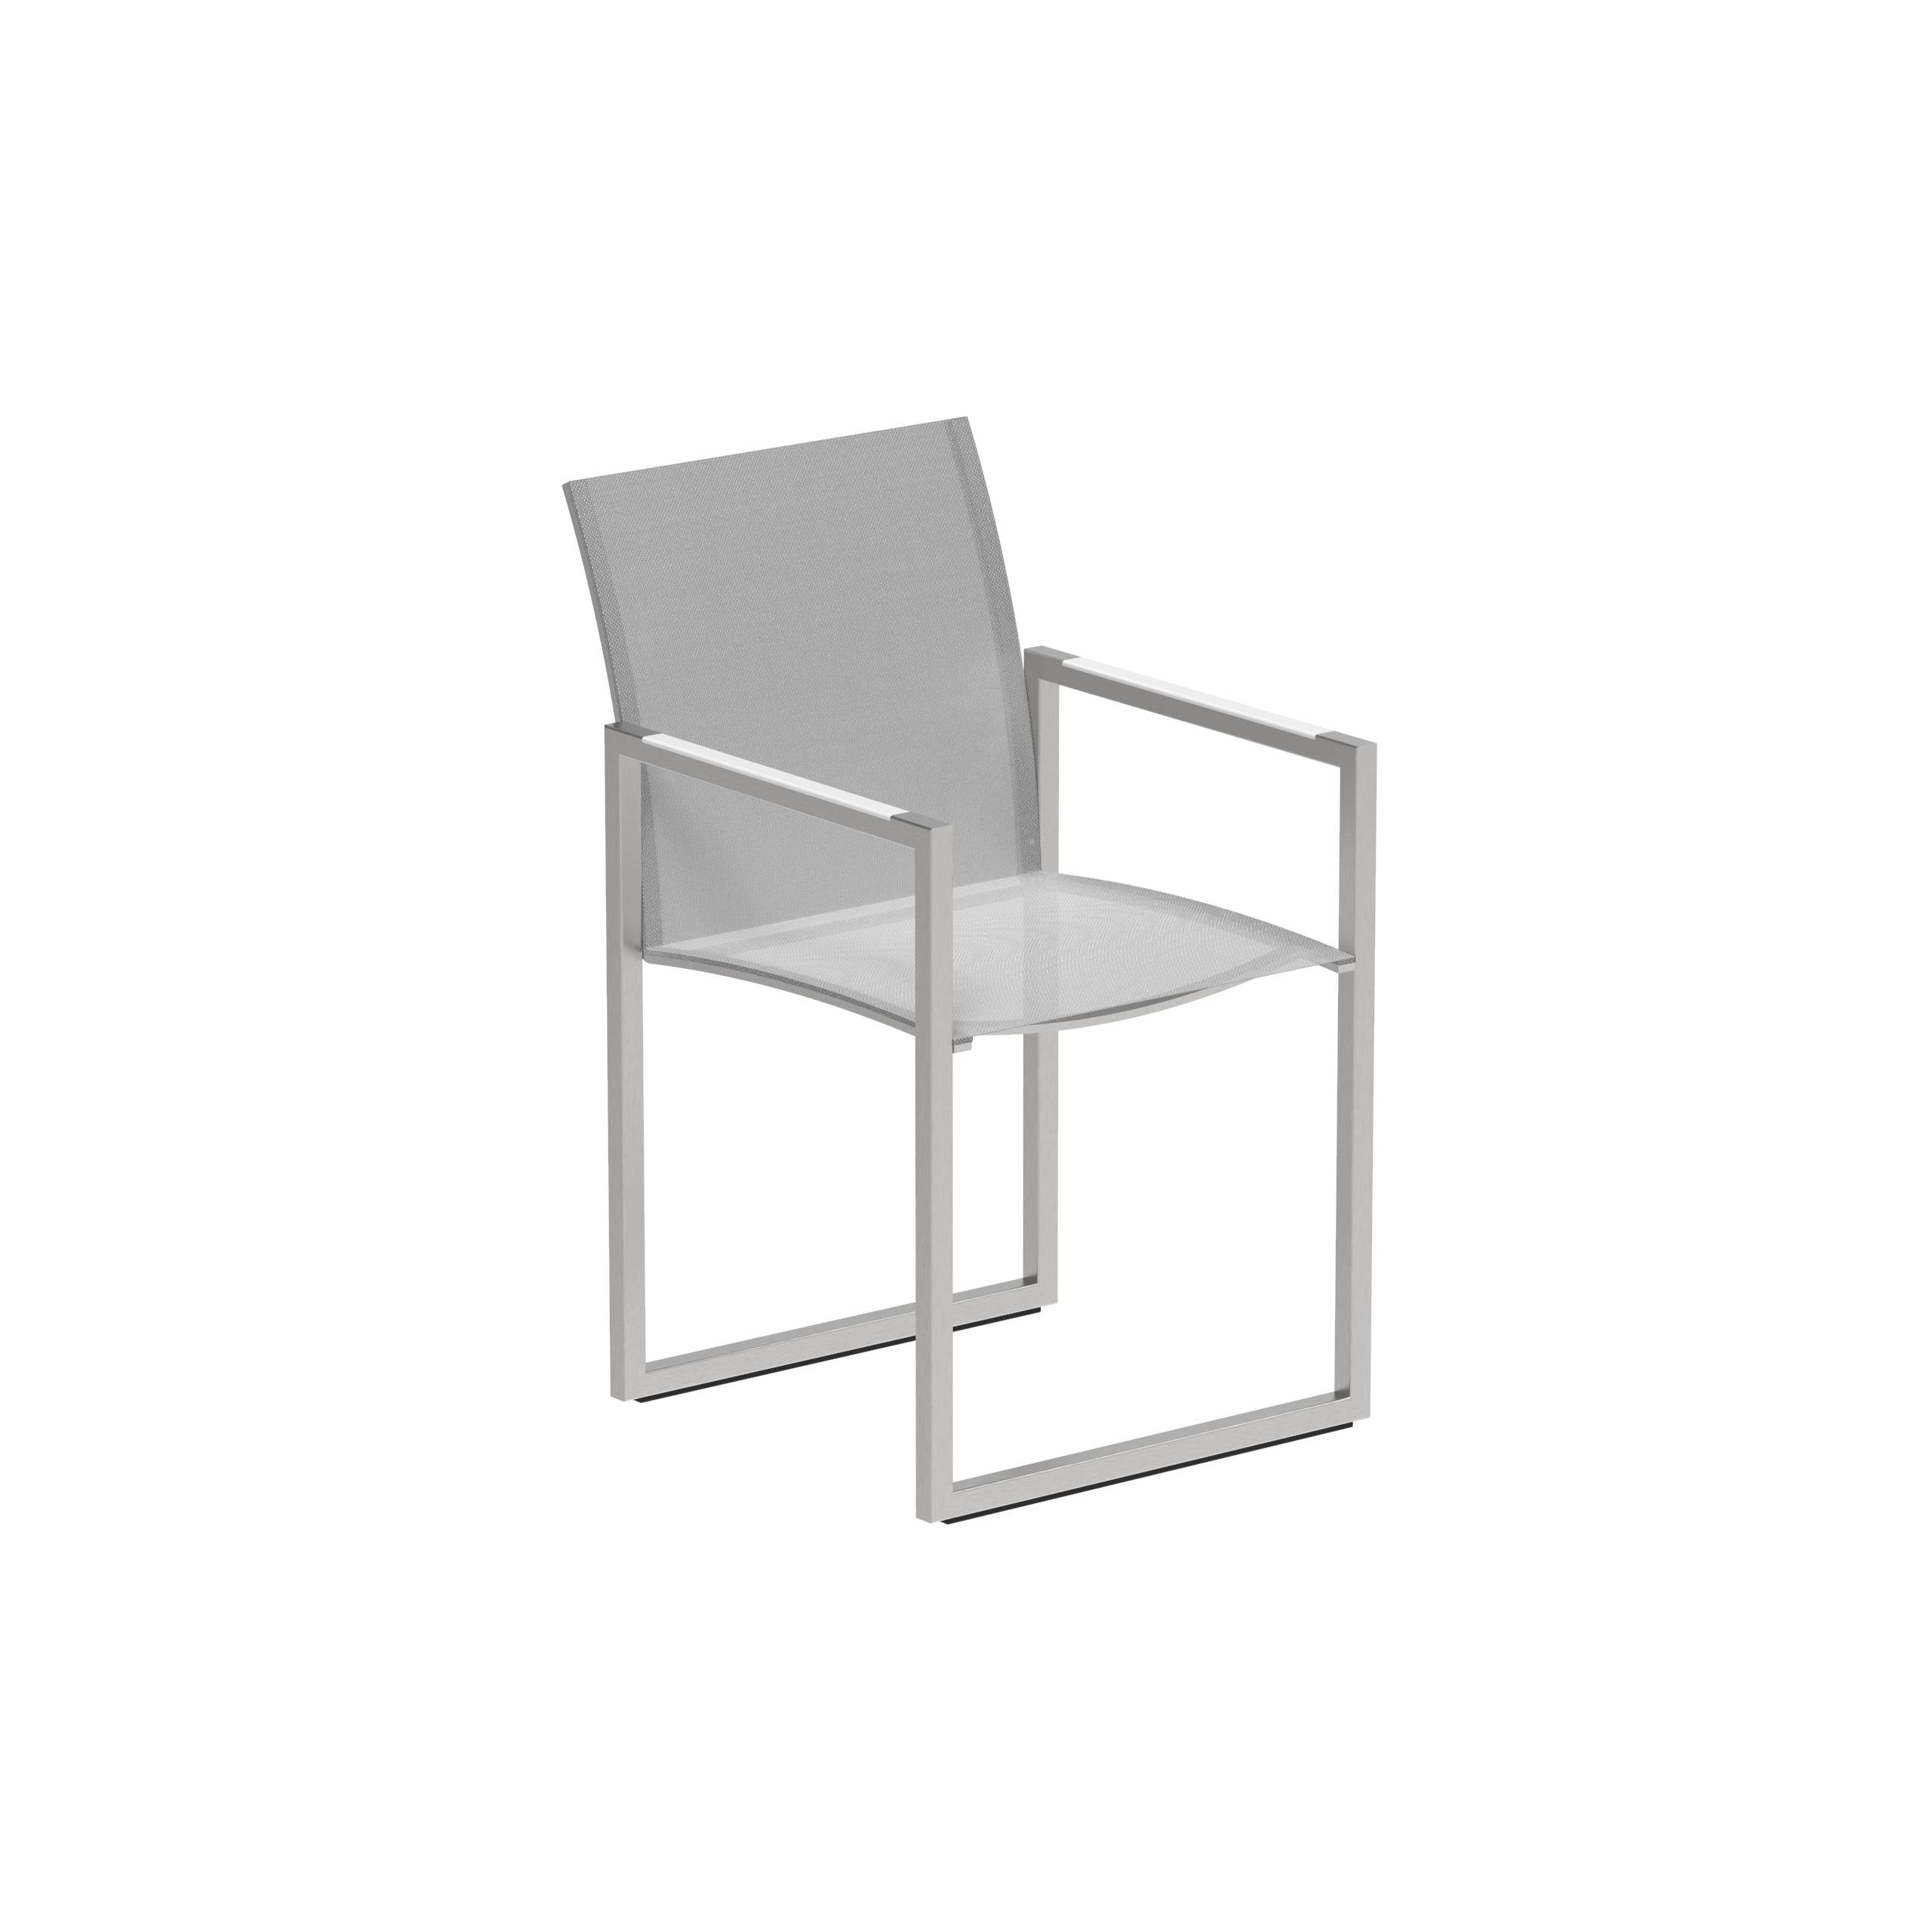 Ninix Armchair Stainless Steel And Batyline White + Pl. Armrests